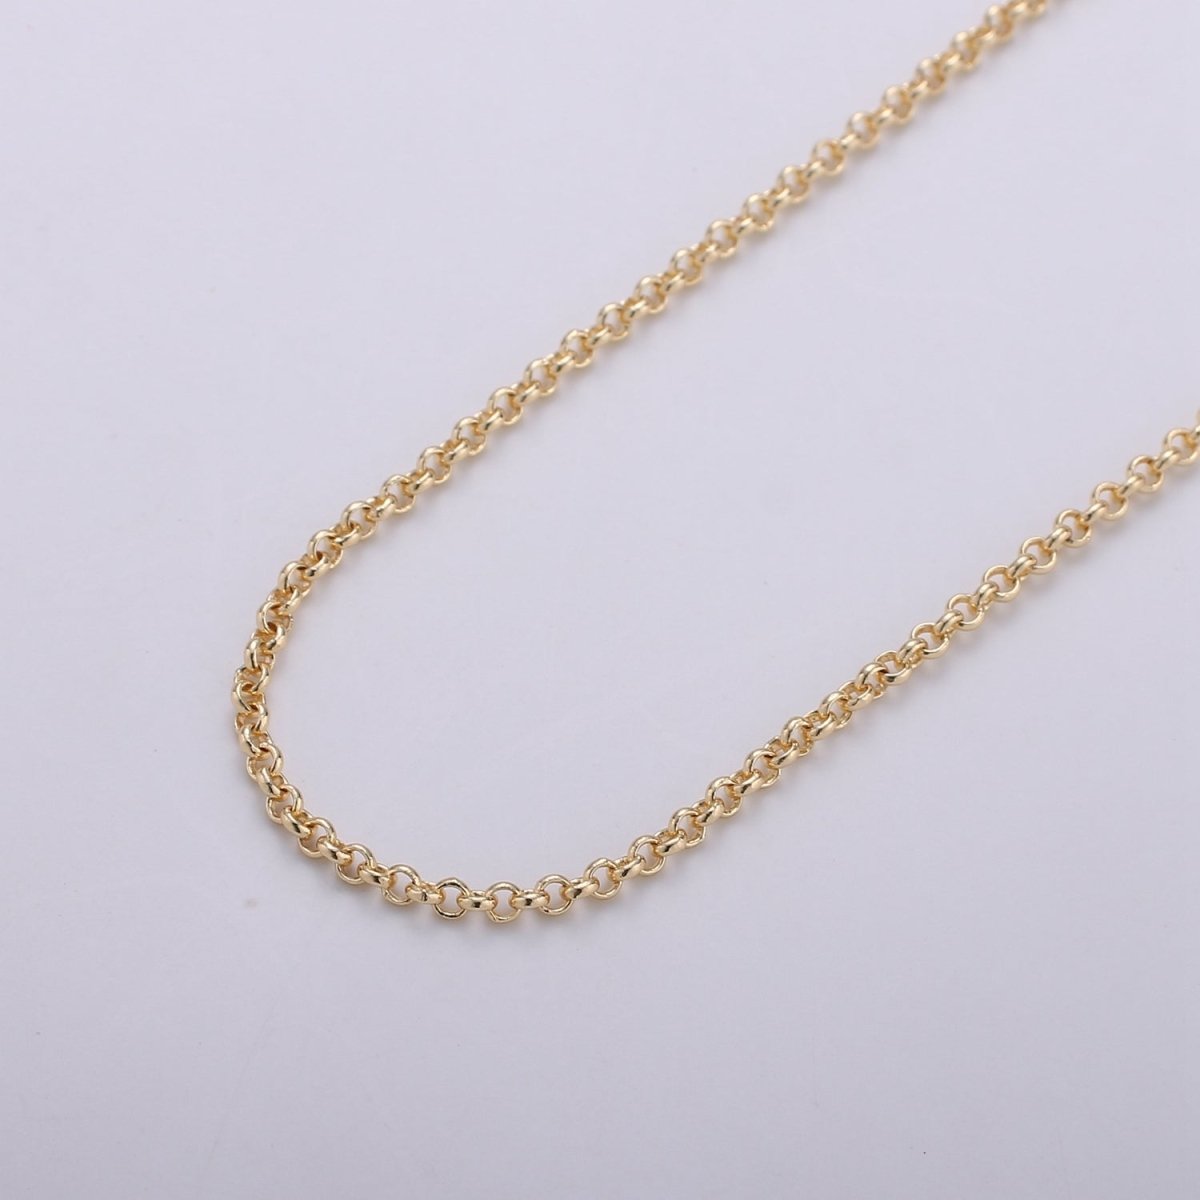 Gold Round ROLO Cable Link Chain, Link Size 3.5X3.5mm, 16K Gold Filled Rolo Chain By Yard, Unfinished Chain For Jewelry Supply | ROLL-278 Clearance Pricing - DLUXCA